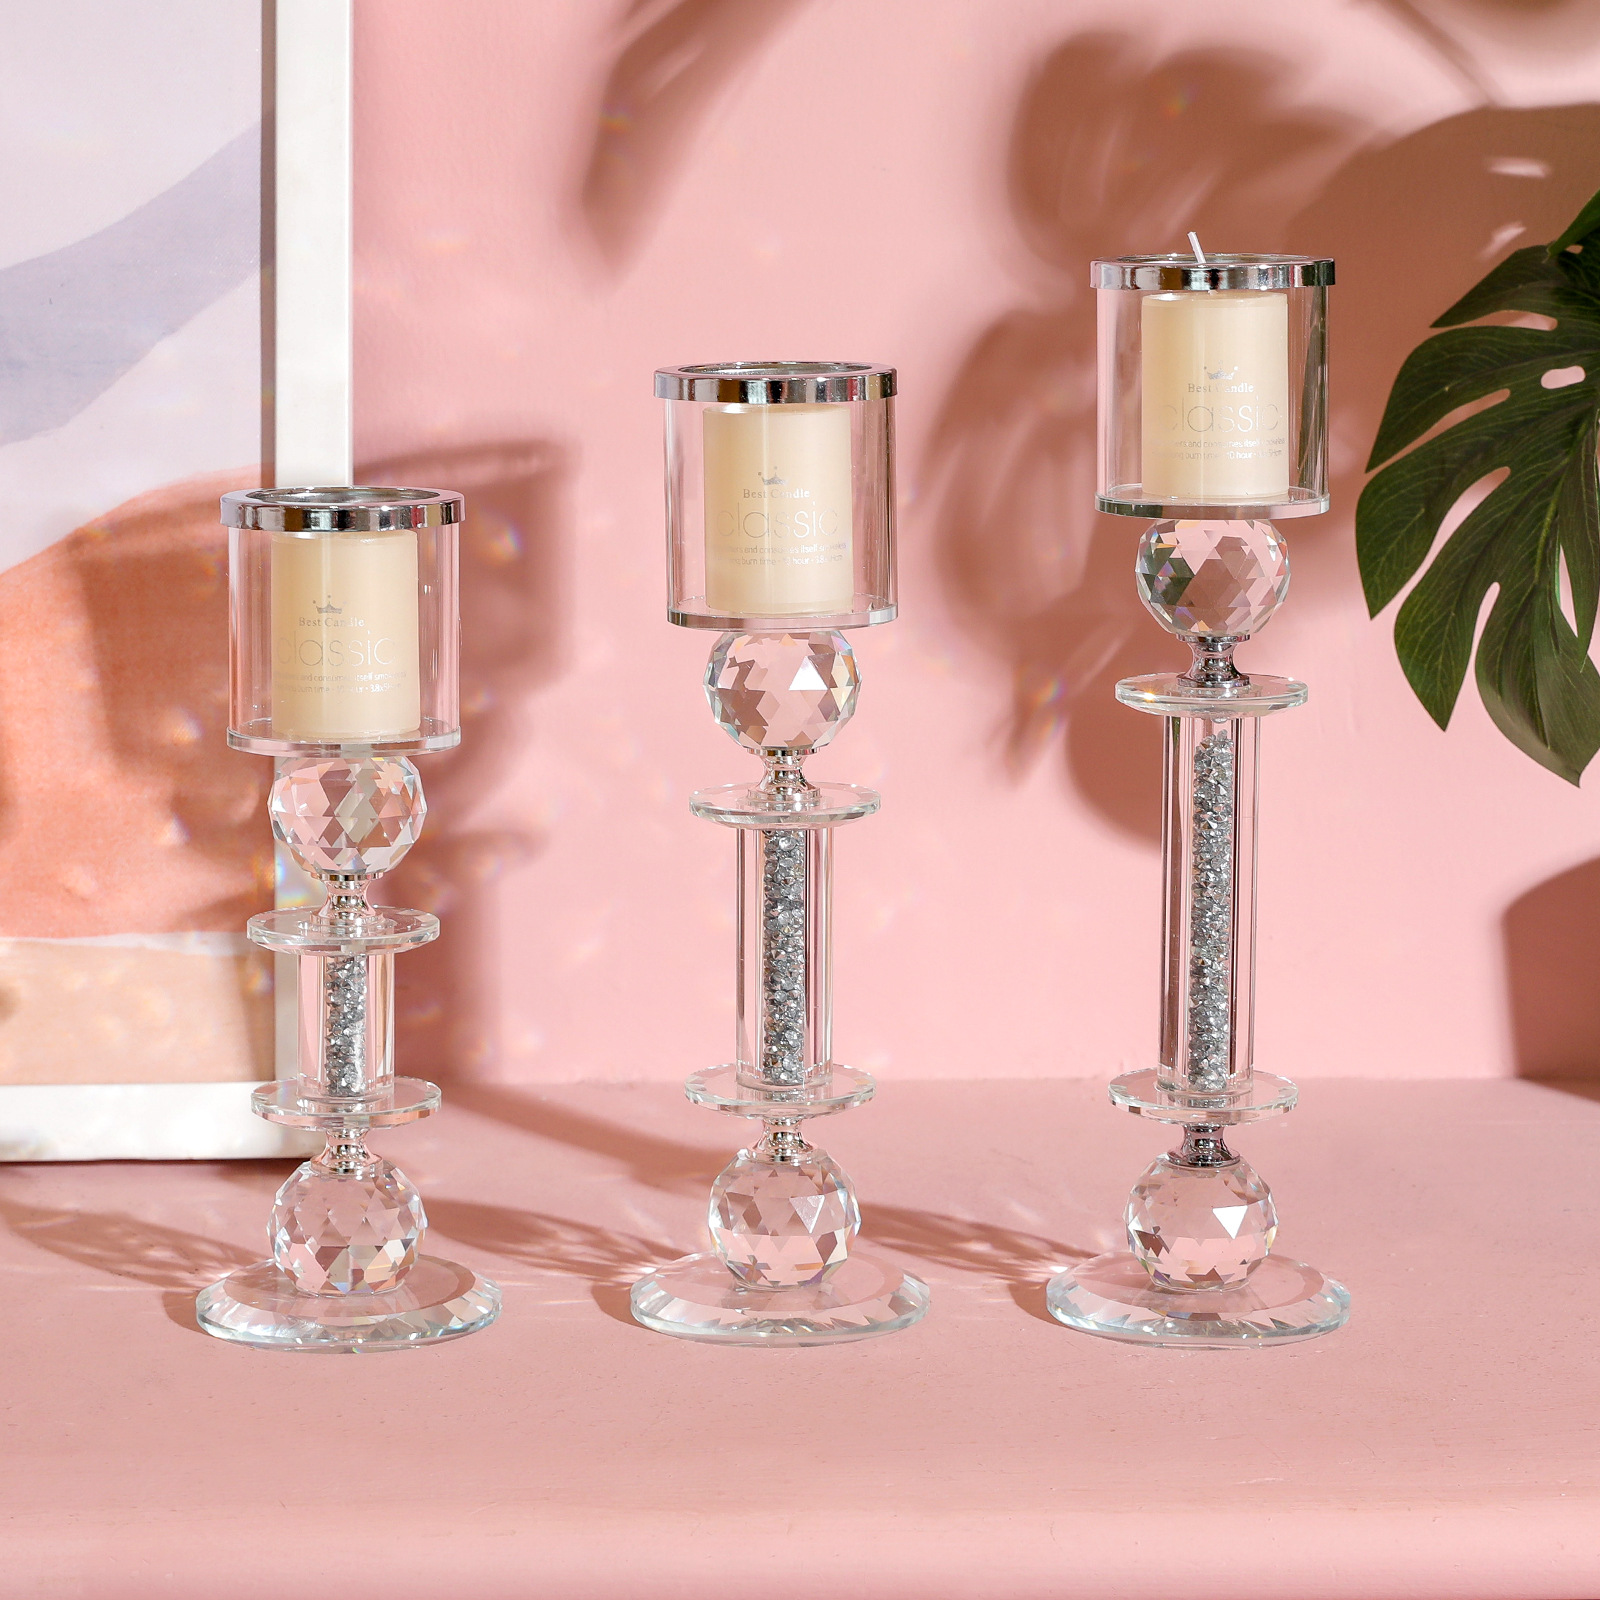 Factory Direct Crystal Candle Holder Cross-Border Amazon Candlelight Dinner Props Decoration Glass Candlestick